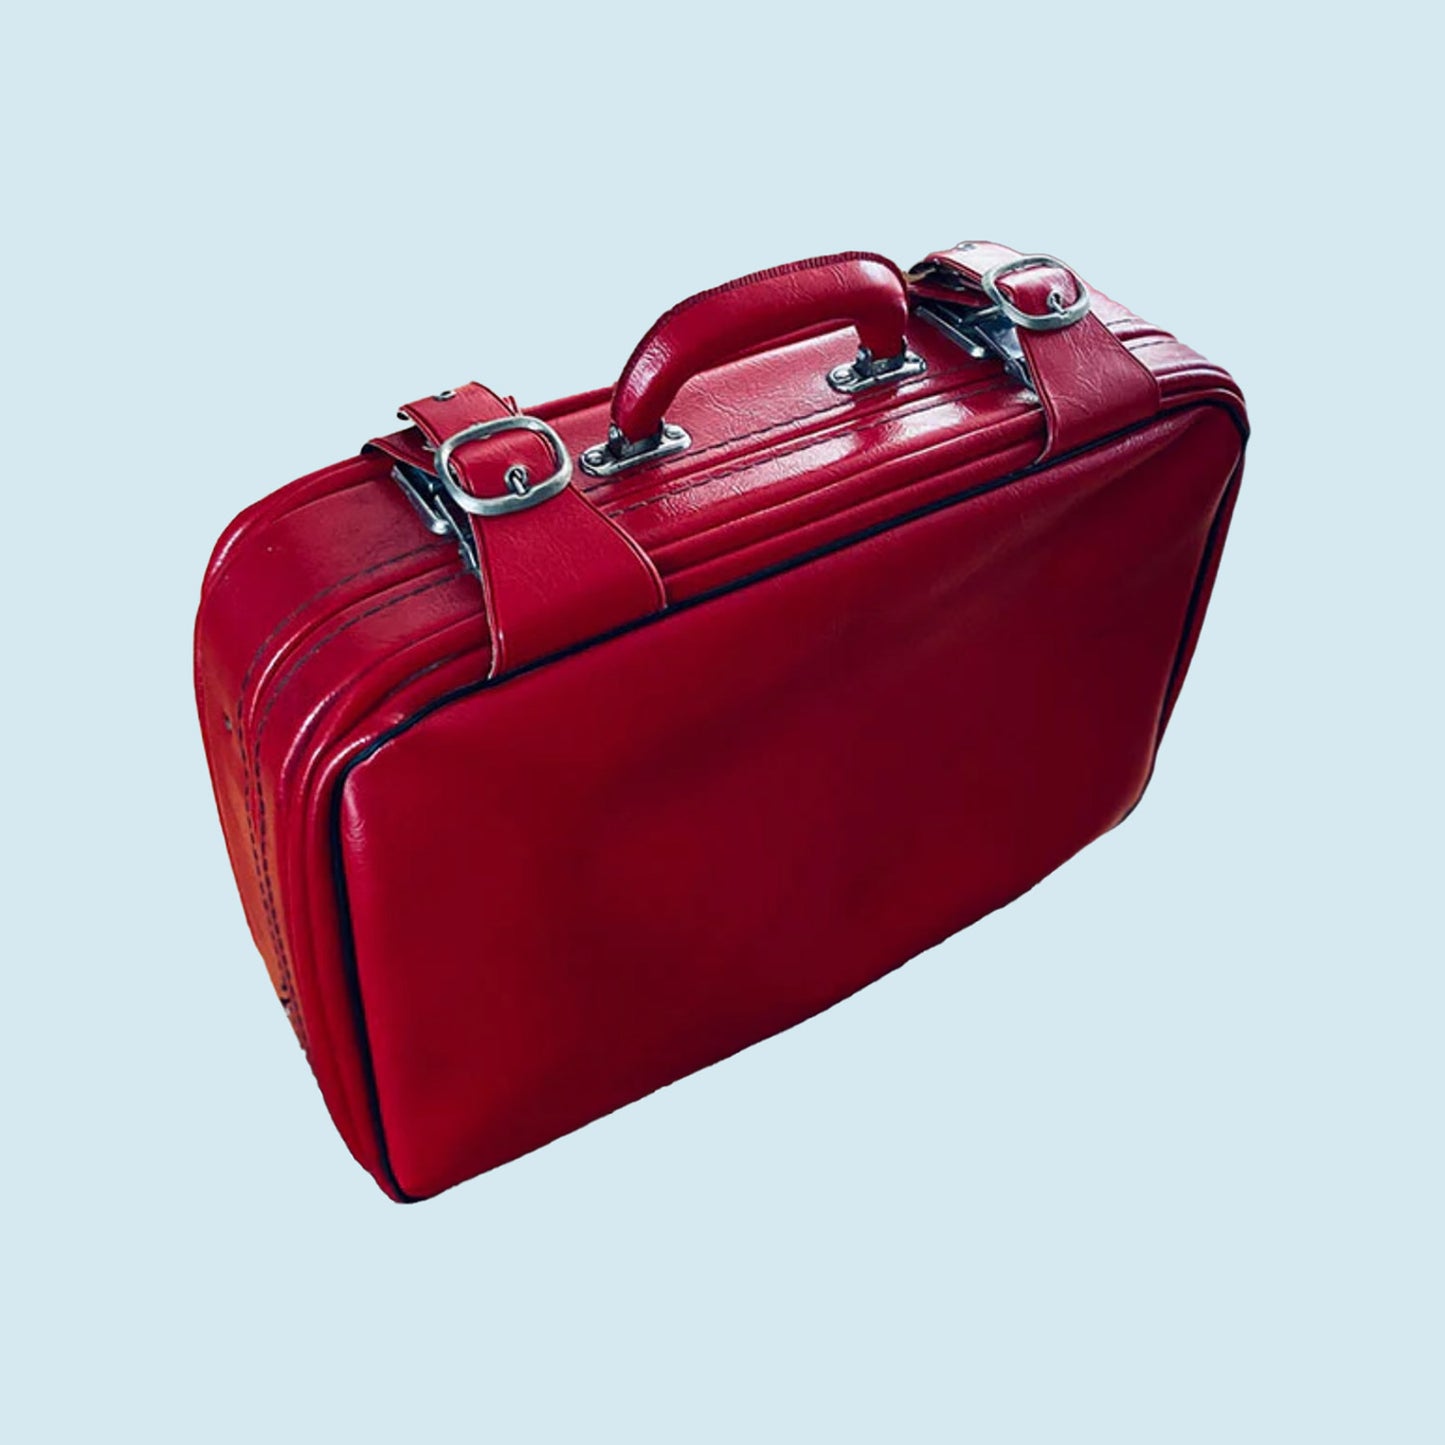 Suitcase, Red, USSR (CCCP), 1970s